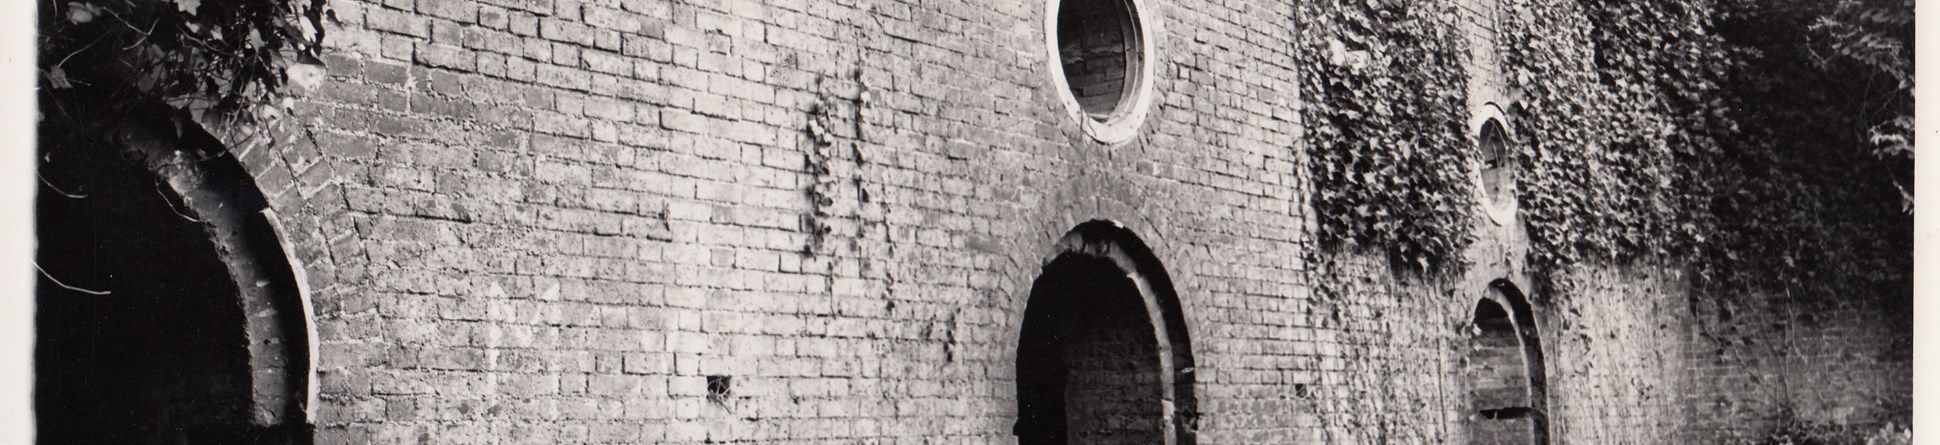 Black and white photo of high brick casemates with arched openings at ground level and circular windows.